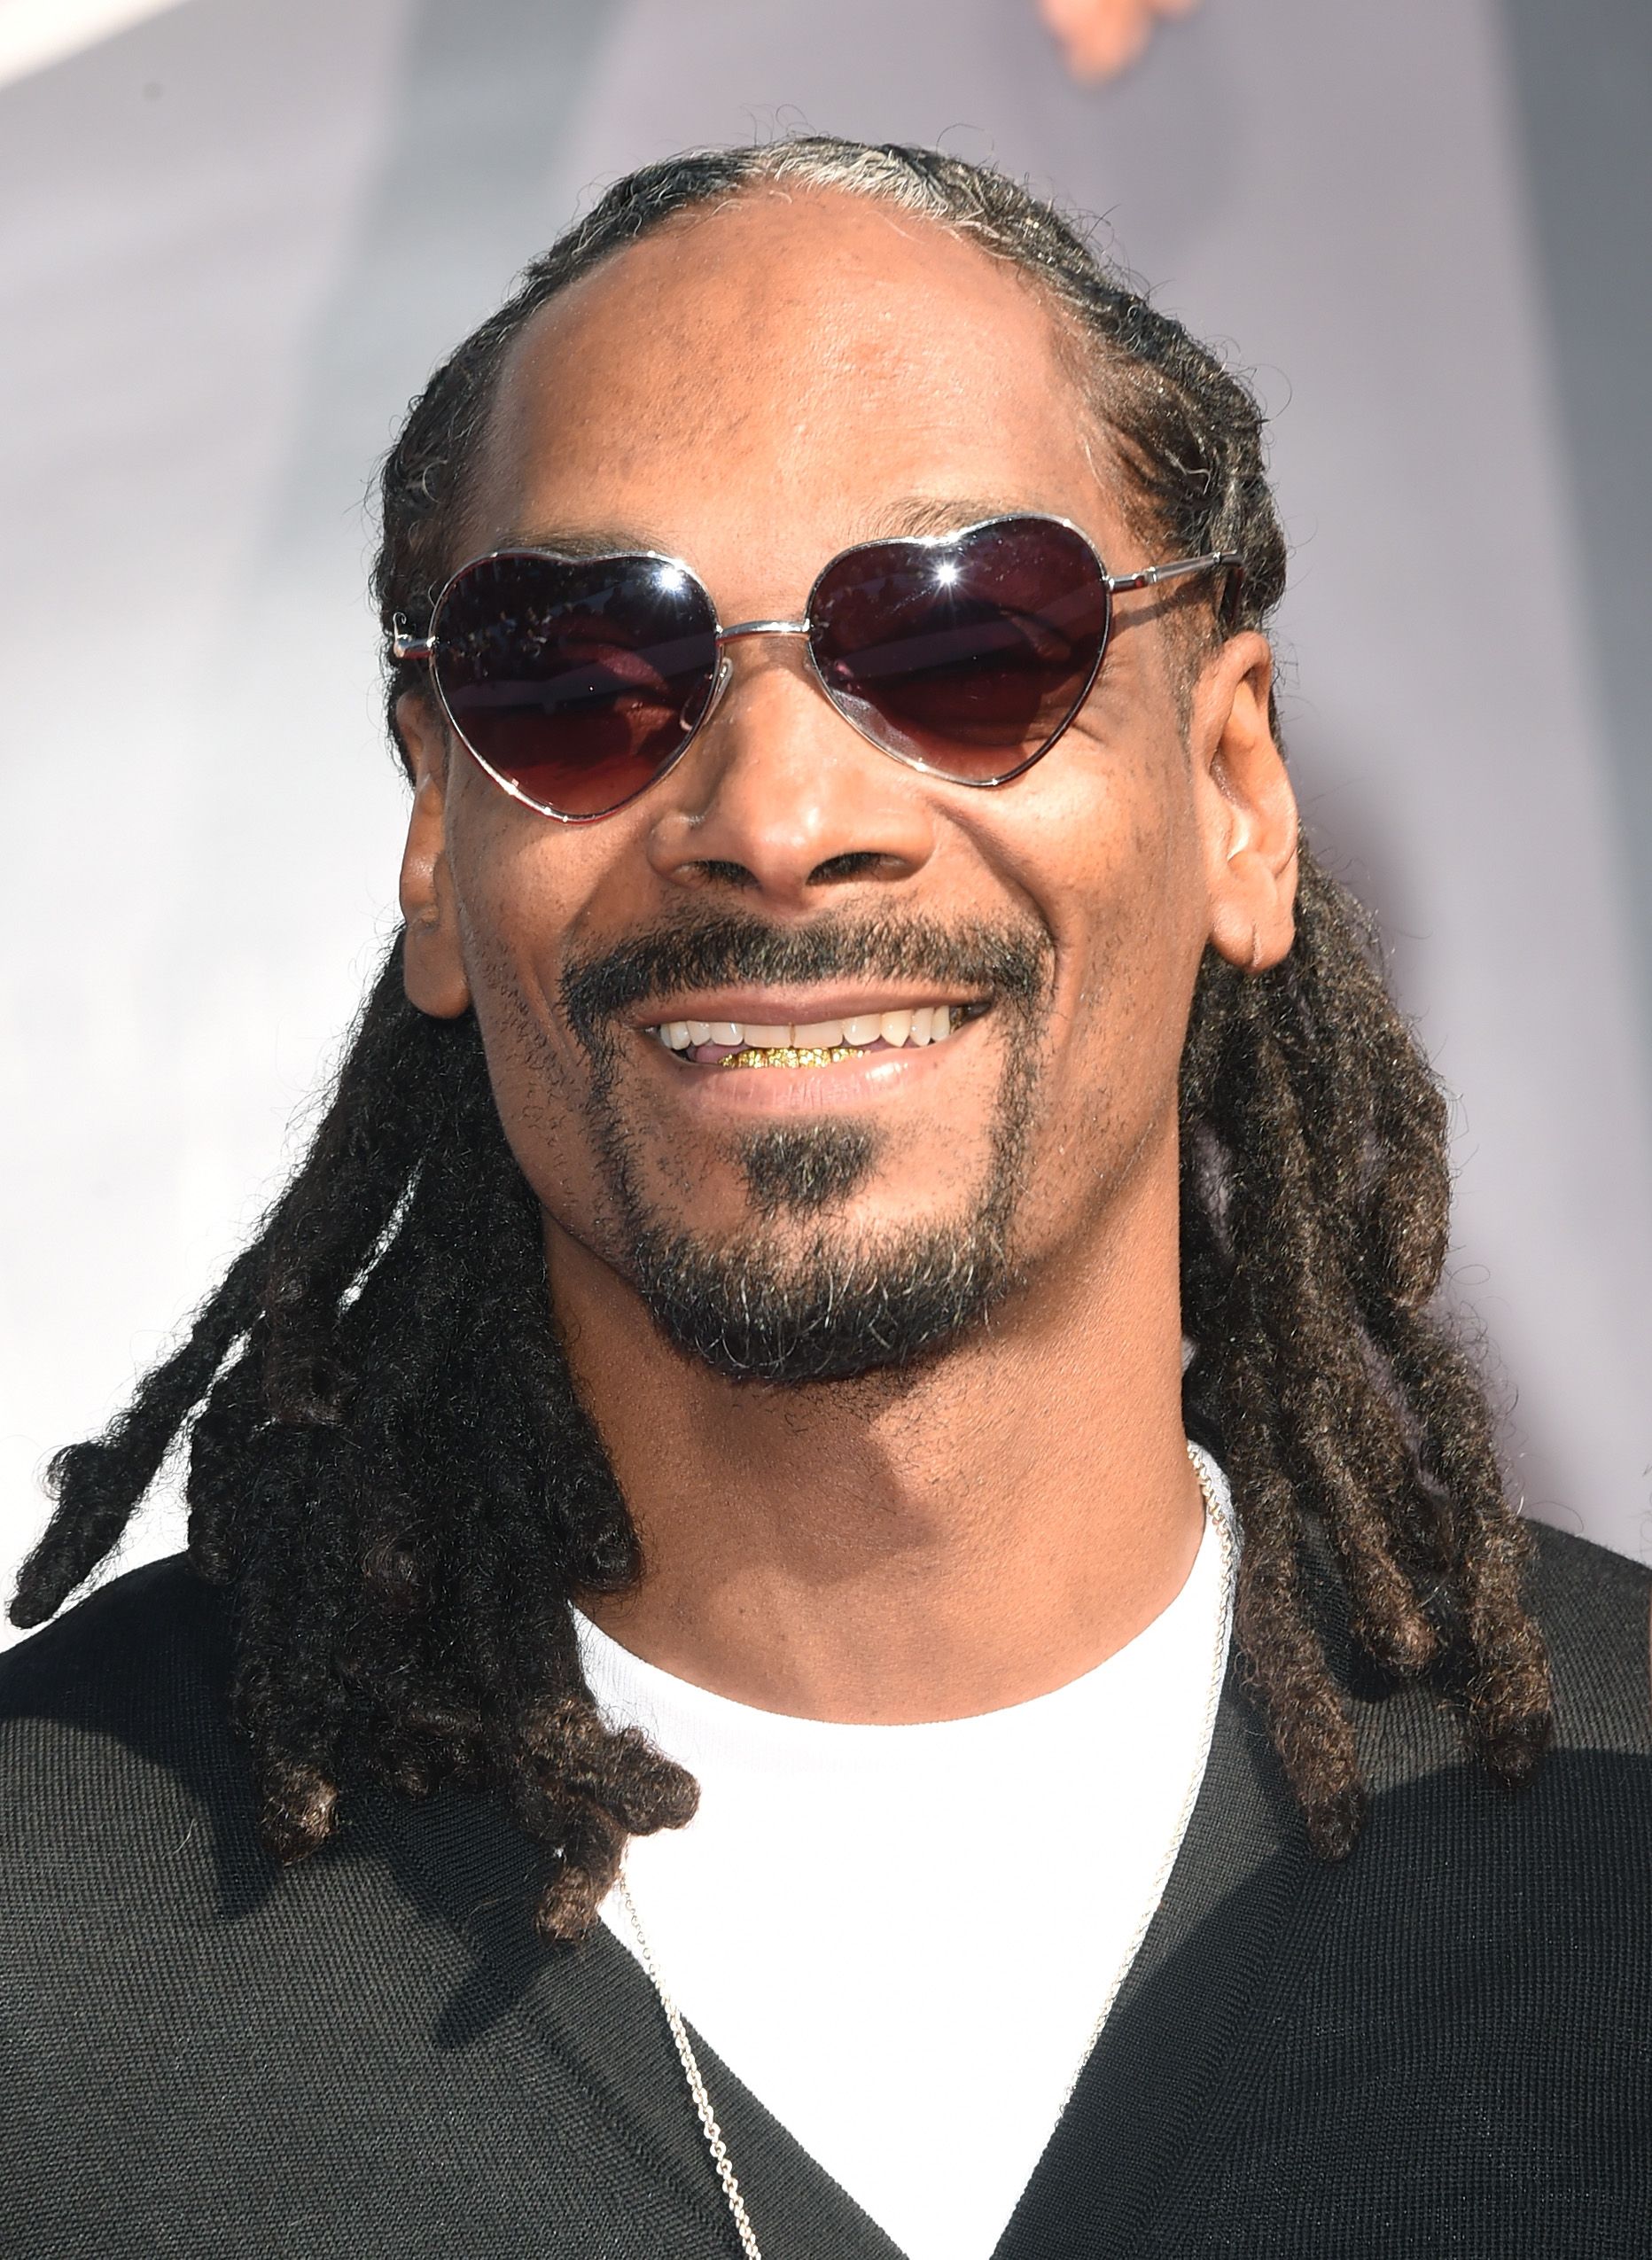 Rapper Snoop Dogg flashes a smile during the 2014 MTV Video Music Awards in Inglewood, California. | Photo: Getty Images